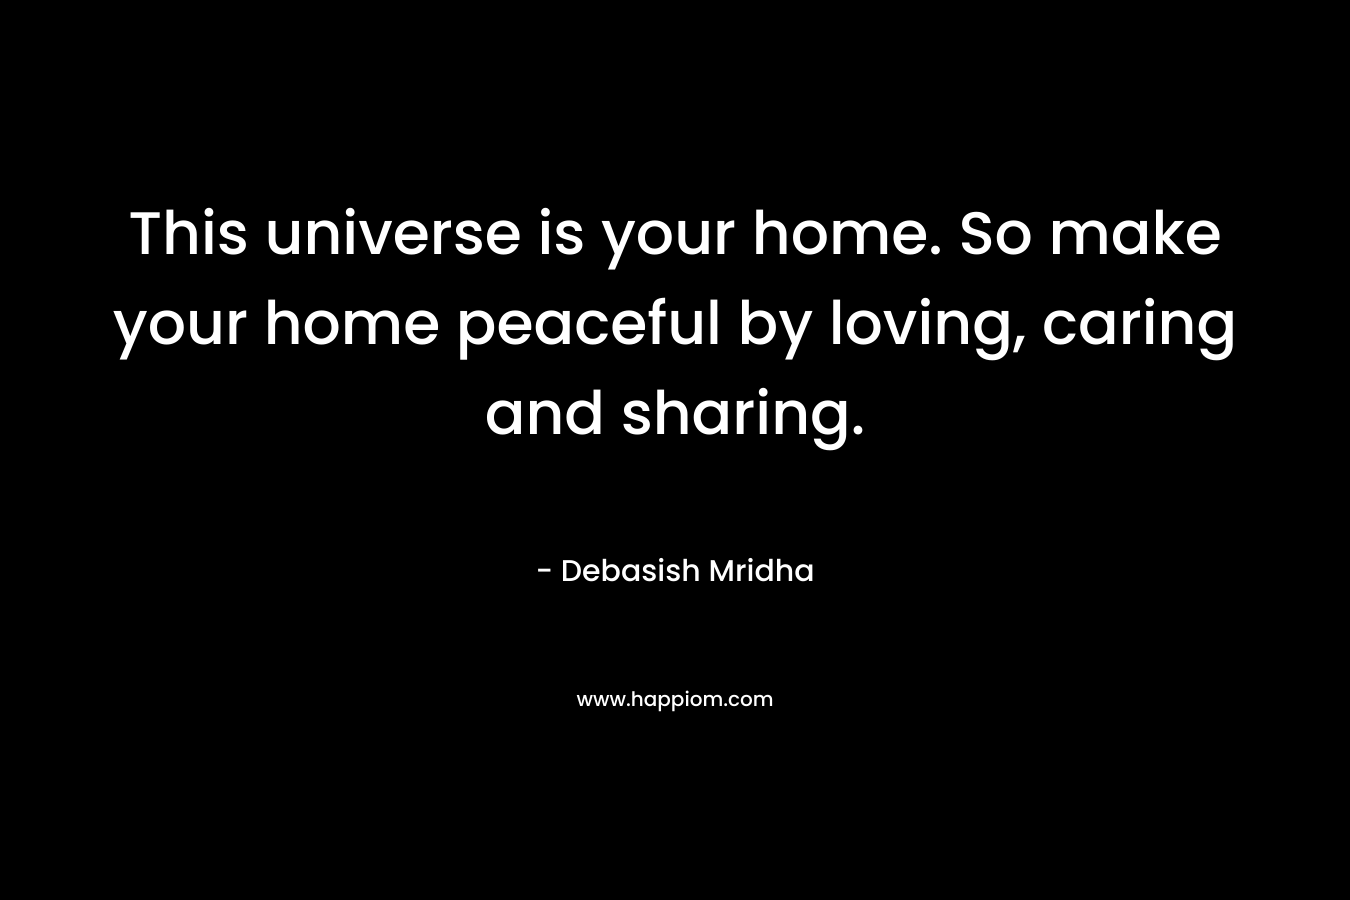 This universe is your home. So make your home peaceful by loving, caring and sharing.